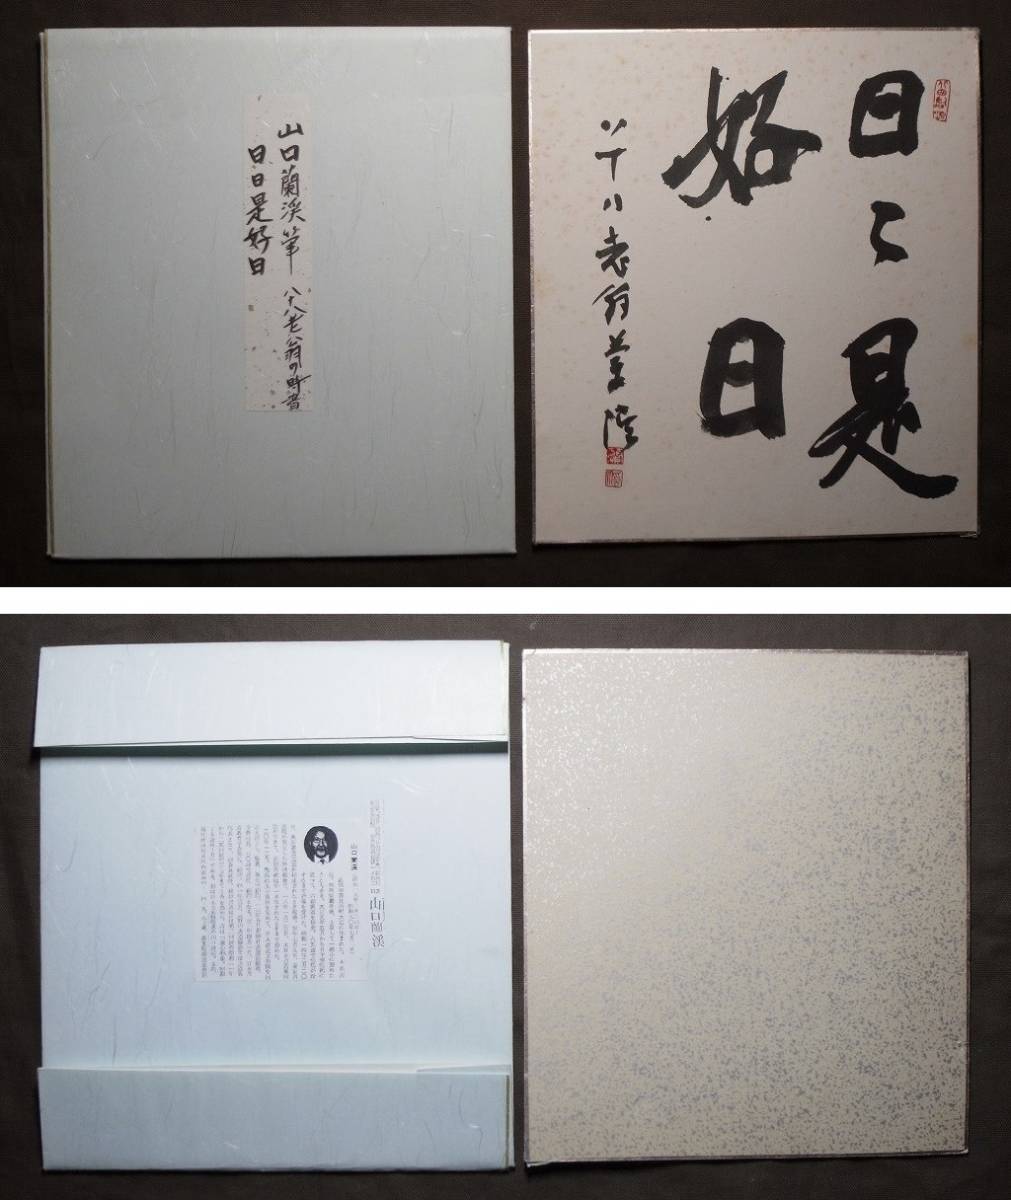  Yamaguchi orchid .[ day day .. day ] square fancy cardboard ( paper book@ autograph genuine work )/ paper house educational book road .. -ply . large pavilion city old ratio inside block ..book@ name : south . Kouya mountain calligraphy association. calligraphy . representative .. length 